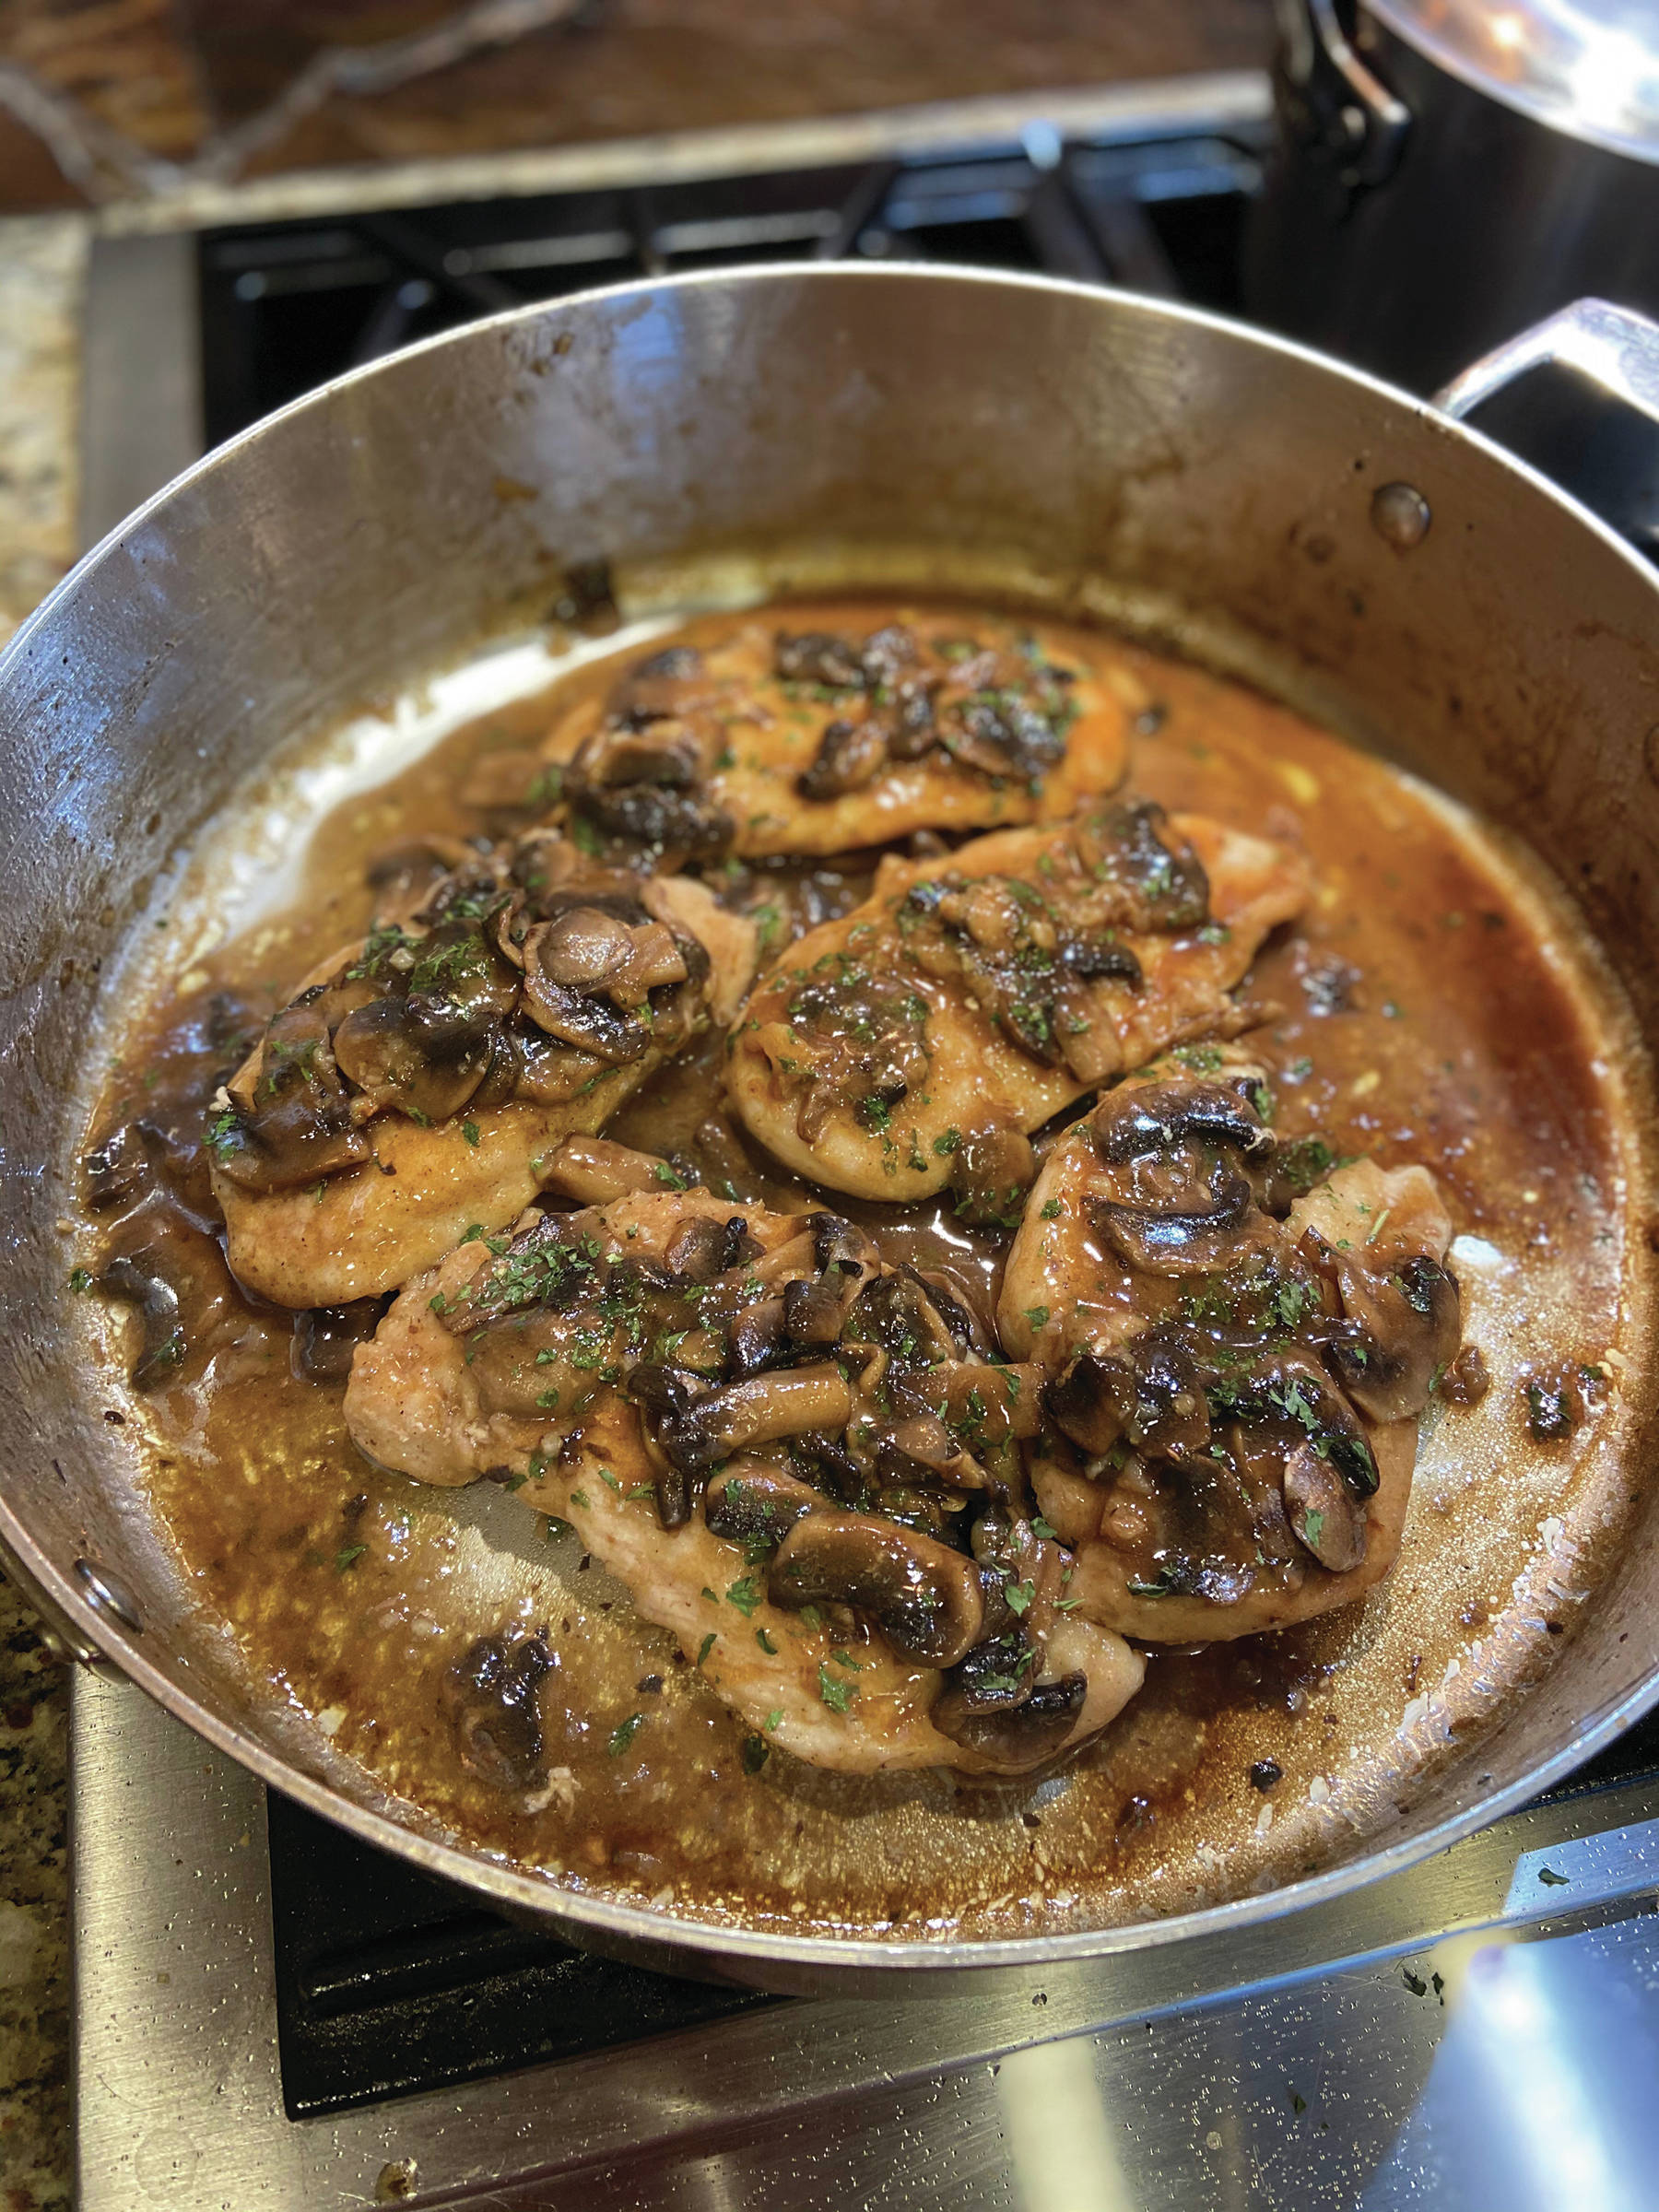 The final step to cooking chicken marsala is to cook the chicken with the browned mushrooms and marsala sauce, as seen here in a batch Teri Robl made on April 4, 2020, in her kitchen in Homer, Alaska. (Photo by Teri Robl)